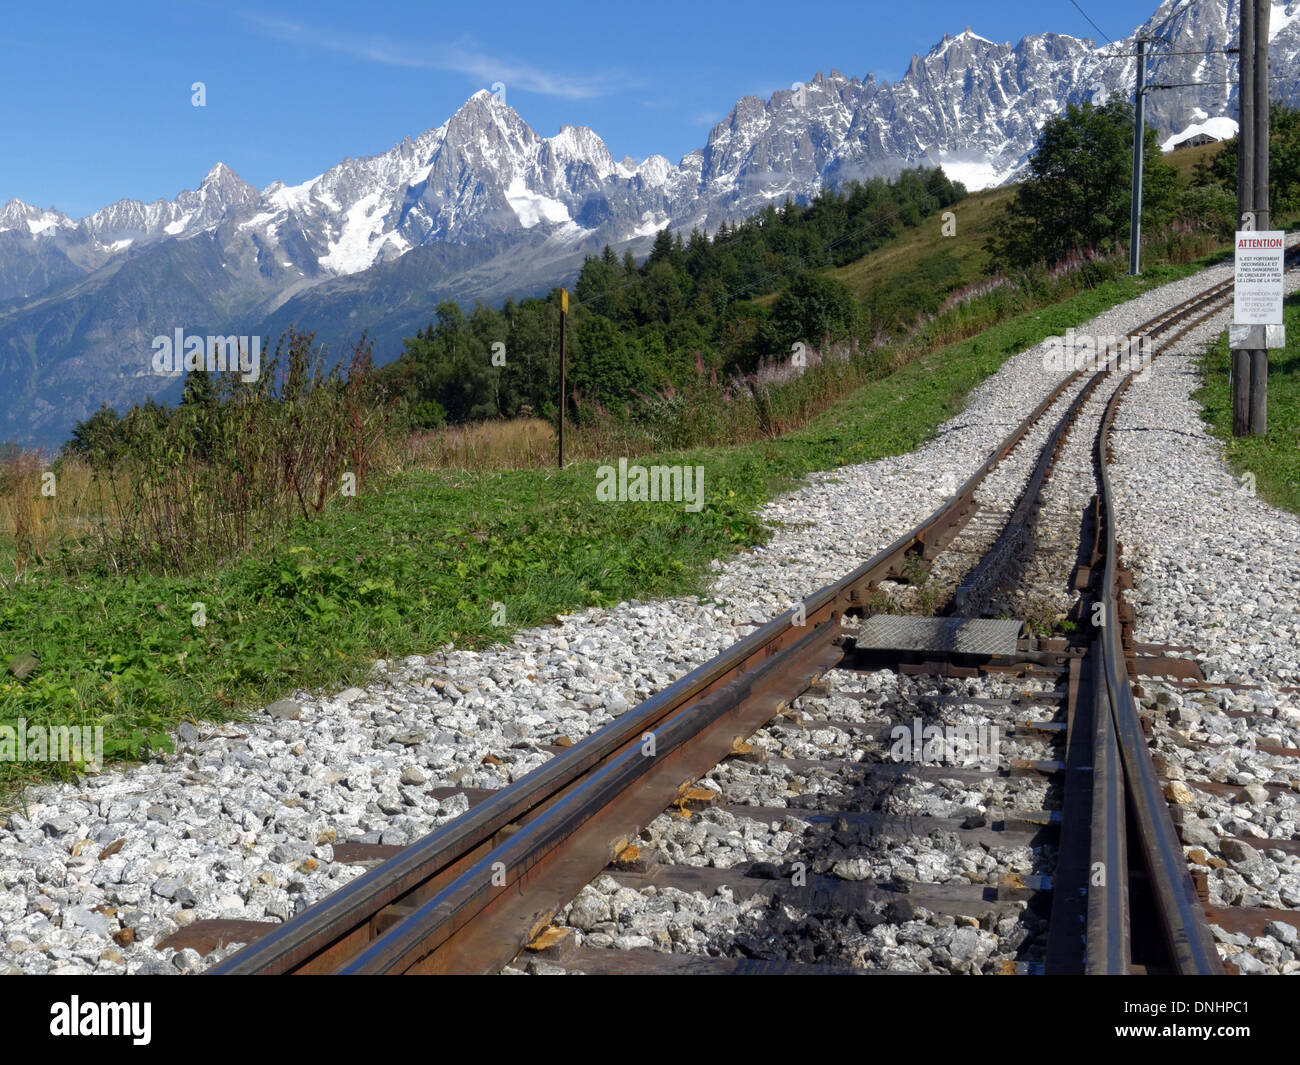 The cog railway tracks at Bellevue near Chamonix in the French Alps Stock Photo